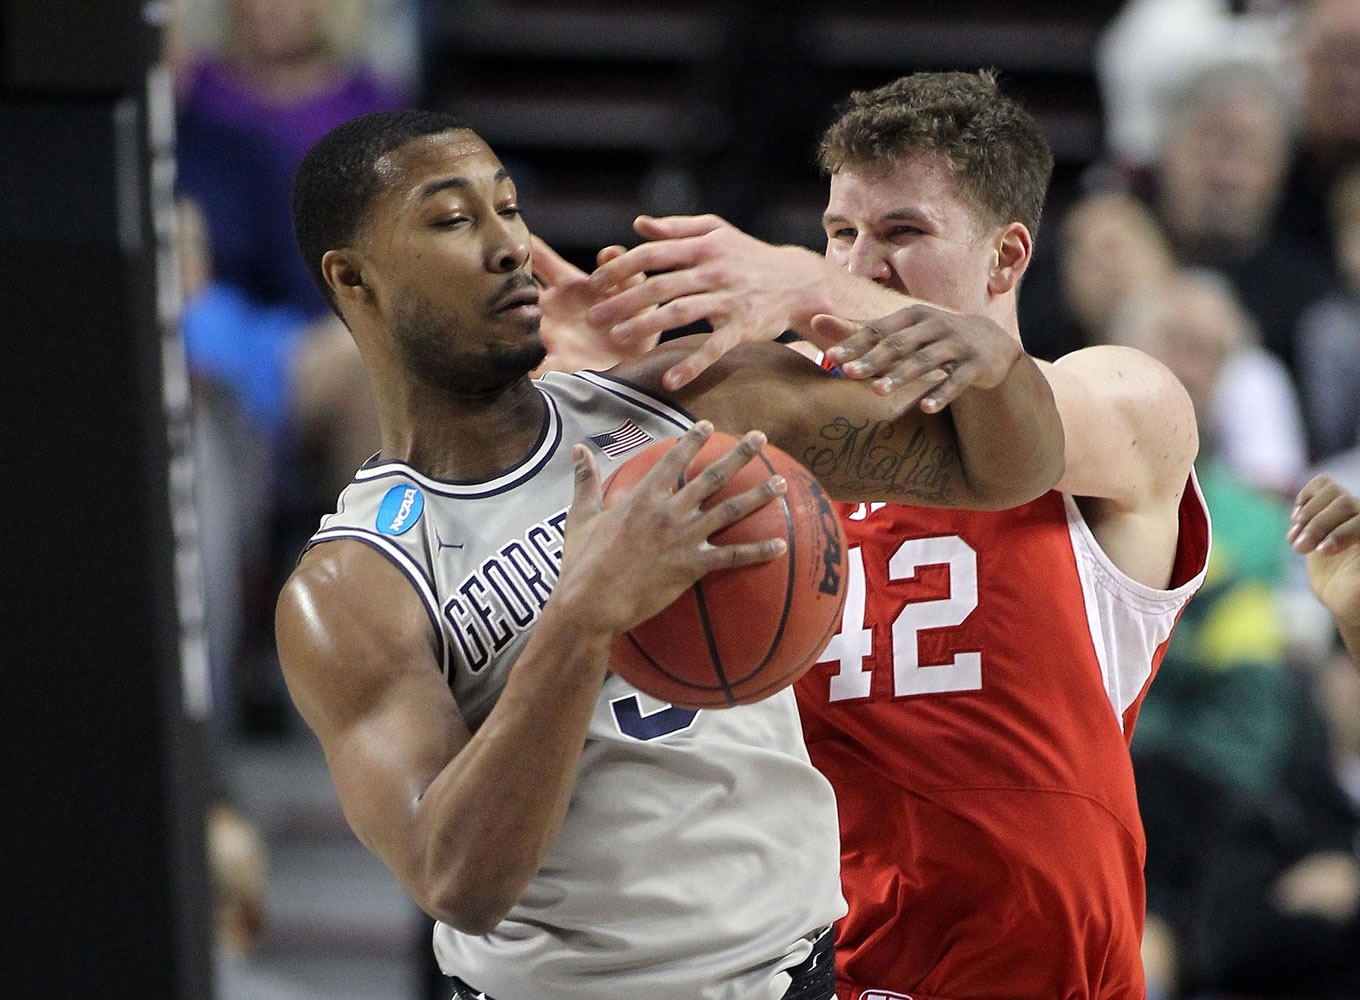 Georgetown forward Mikael Hopkins, left, fights for the ball with Jakob Poeltl during the first half of an NCAA college basketball tournament round of 32 game in Portland, Ore., Saturday, March 21, 2015.